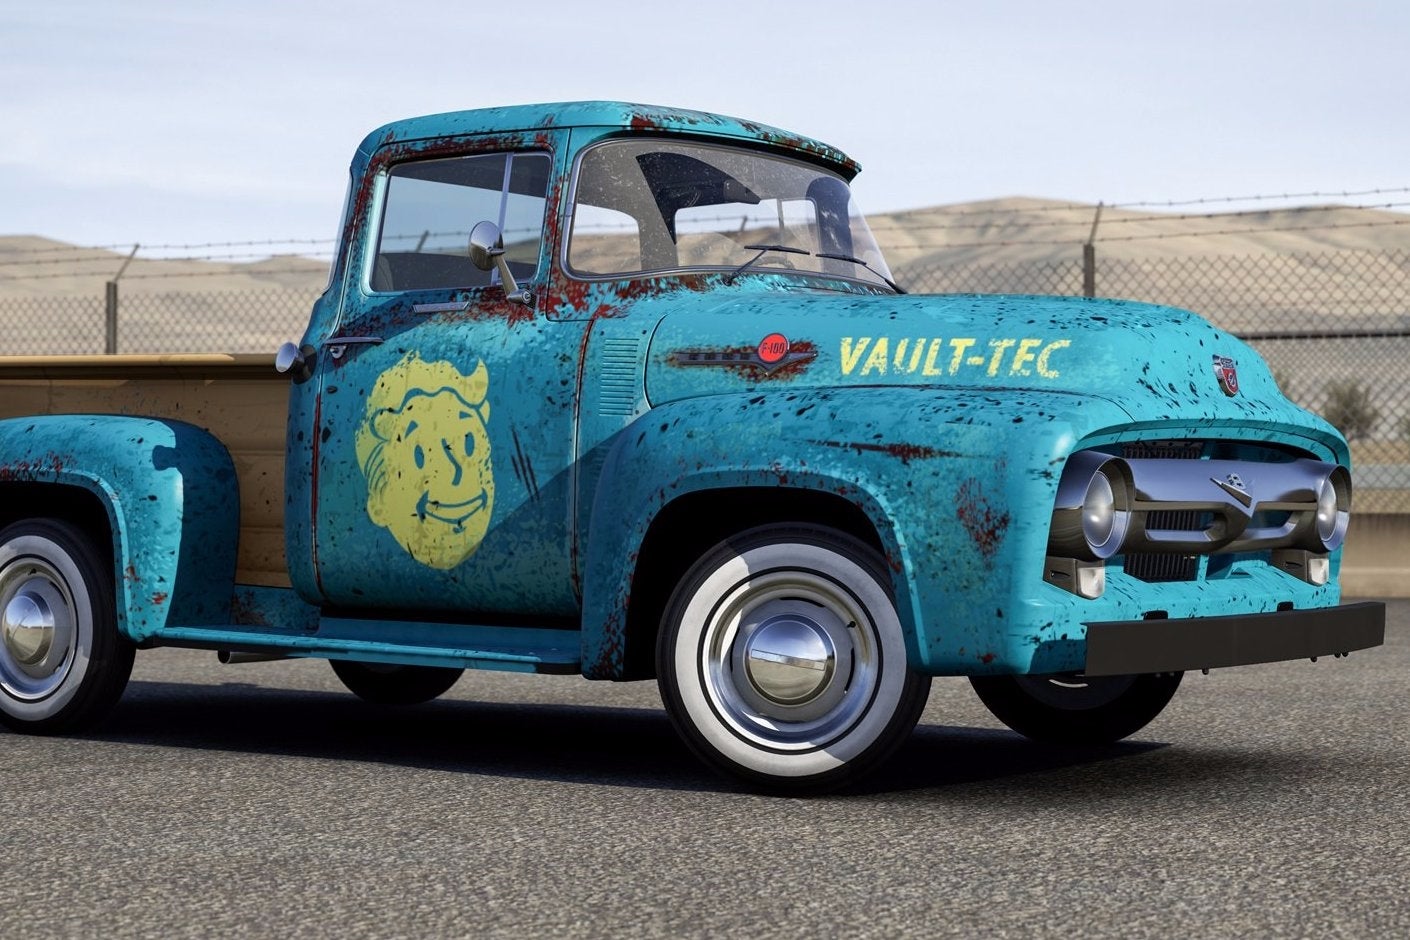 Image for Forza 6 gets Fallout 4 cars